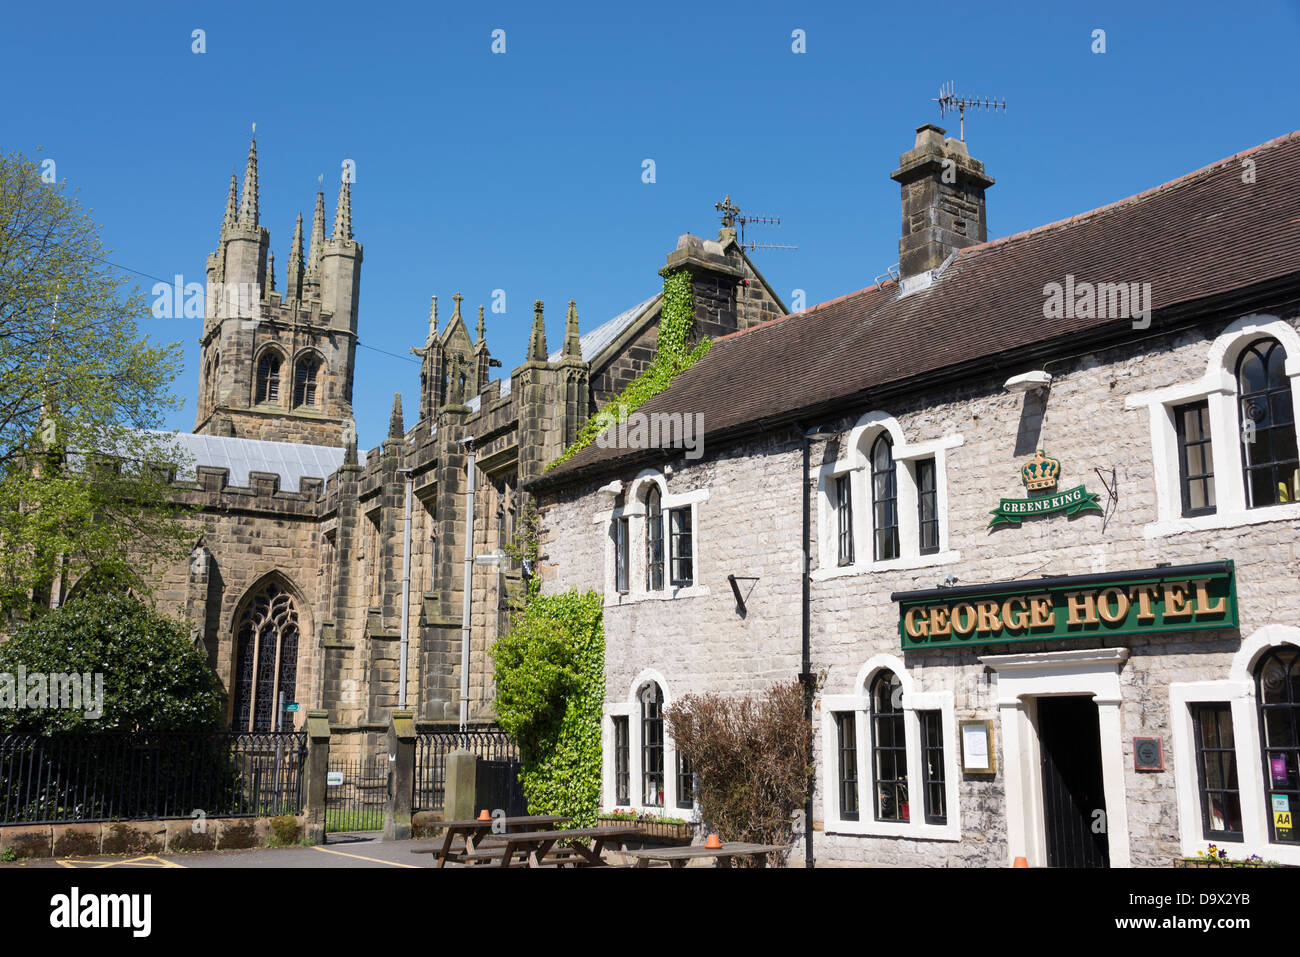 The George Hotel and St John the Baptist church Tideswell, Derbyshire, England. Stock Photo